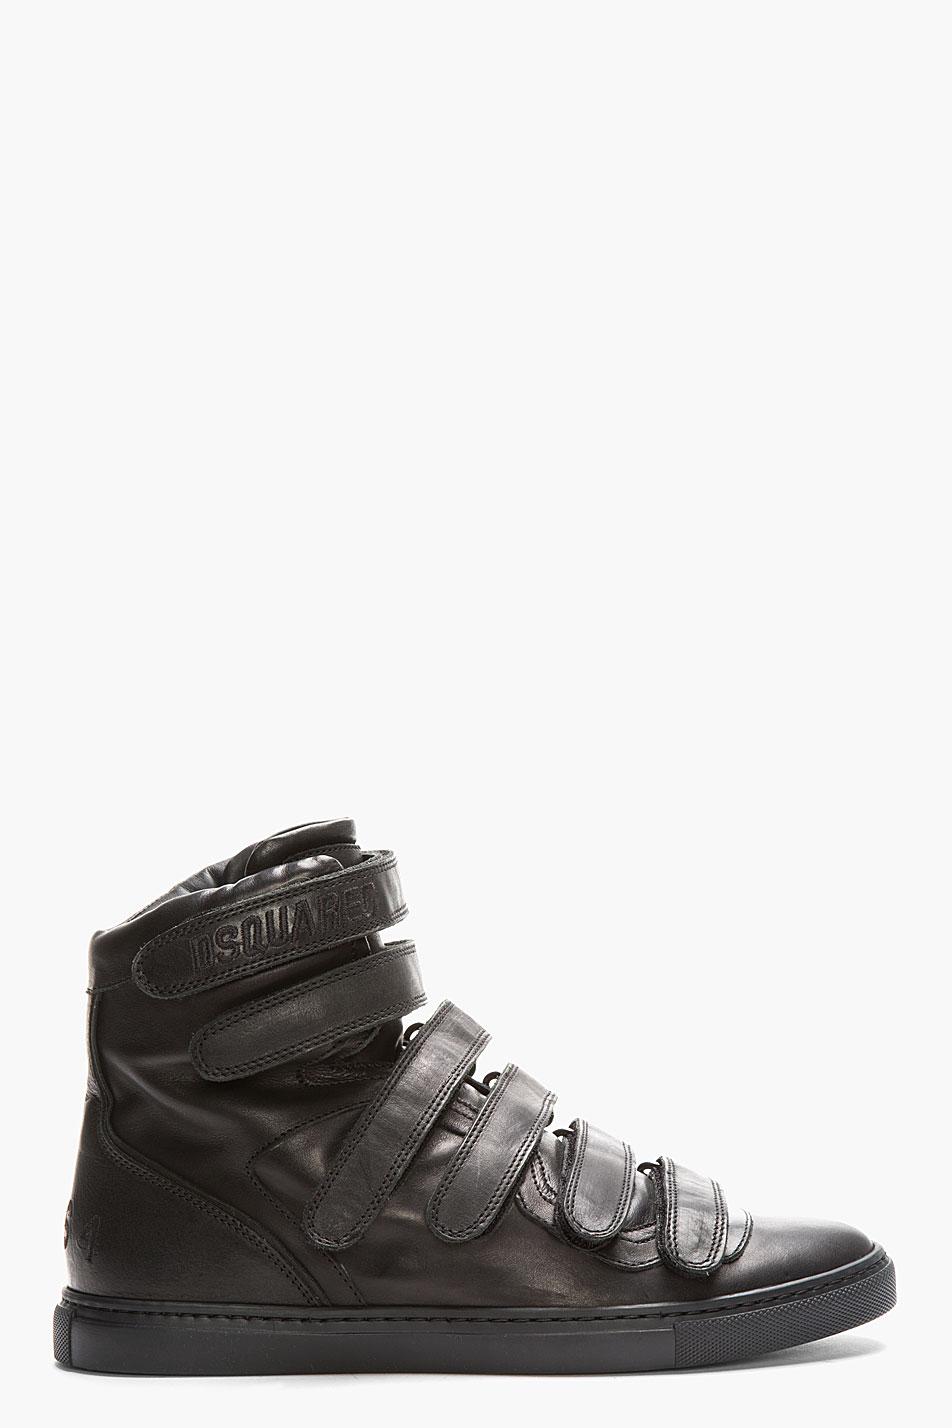 Lyst - Dsquared² Black Leather Velcro Sneakers in Black for Men